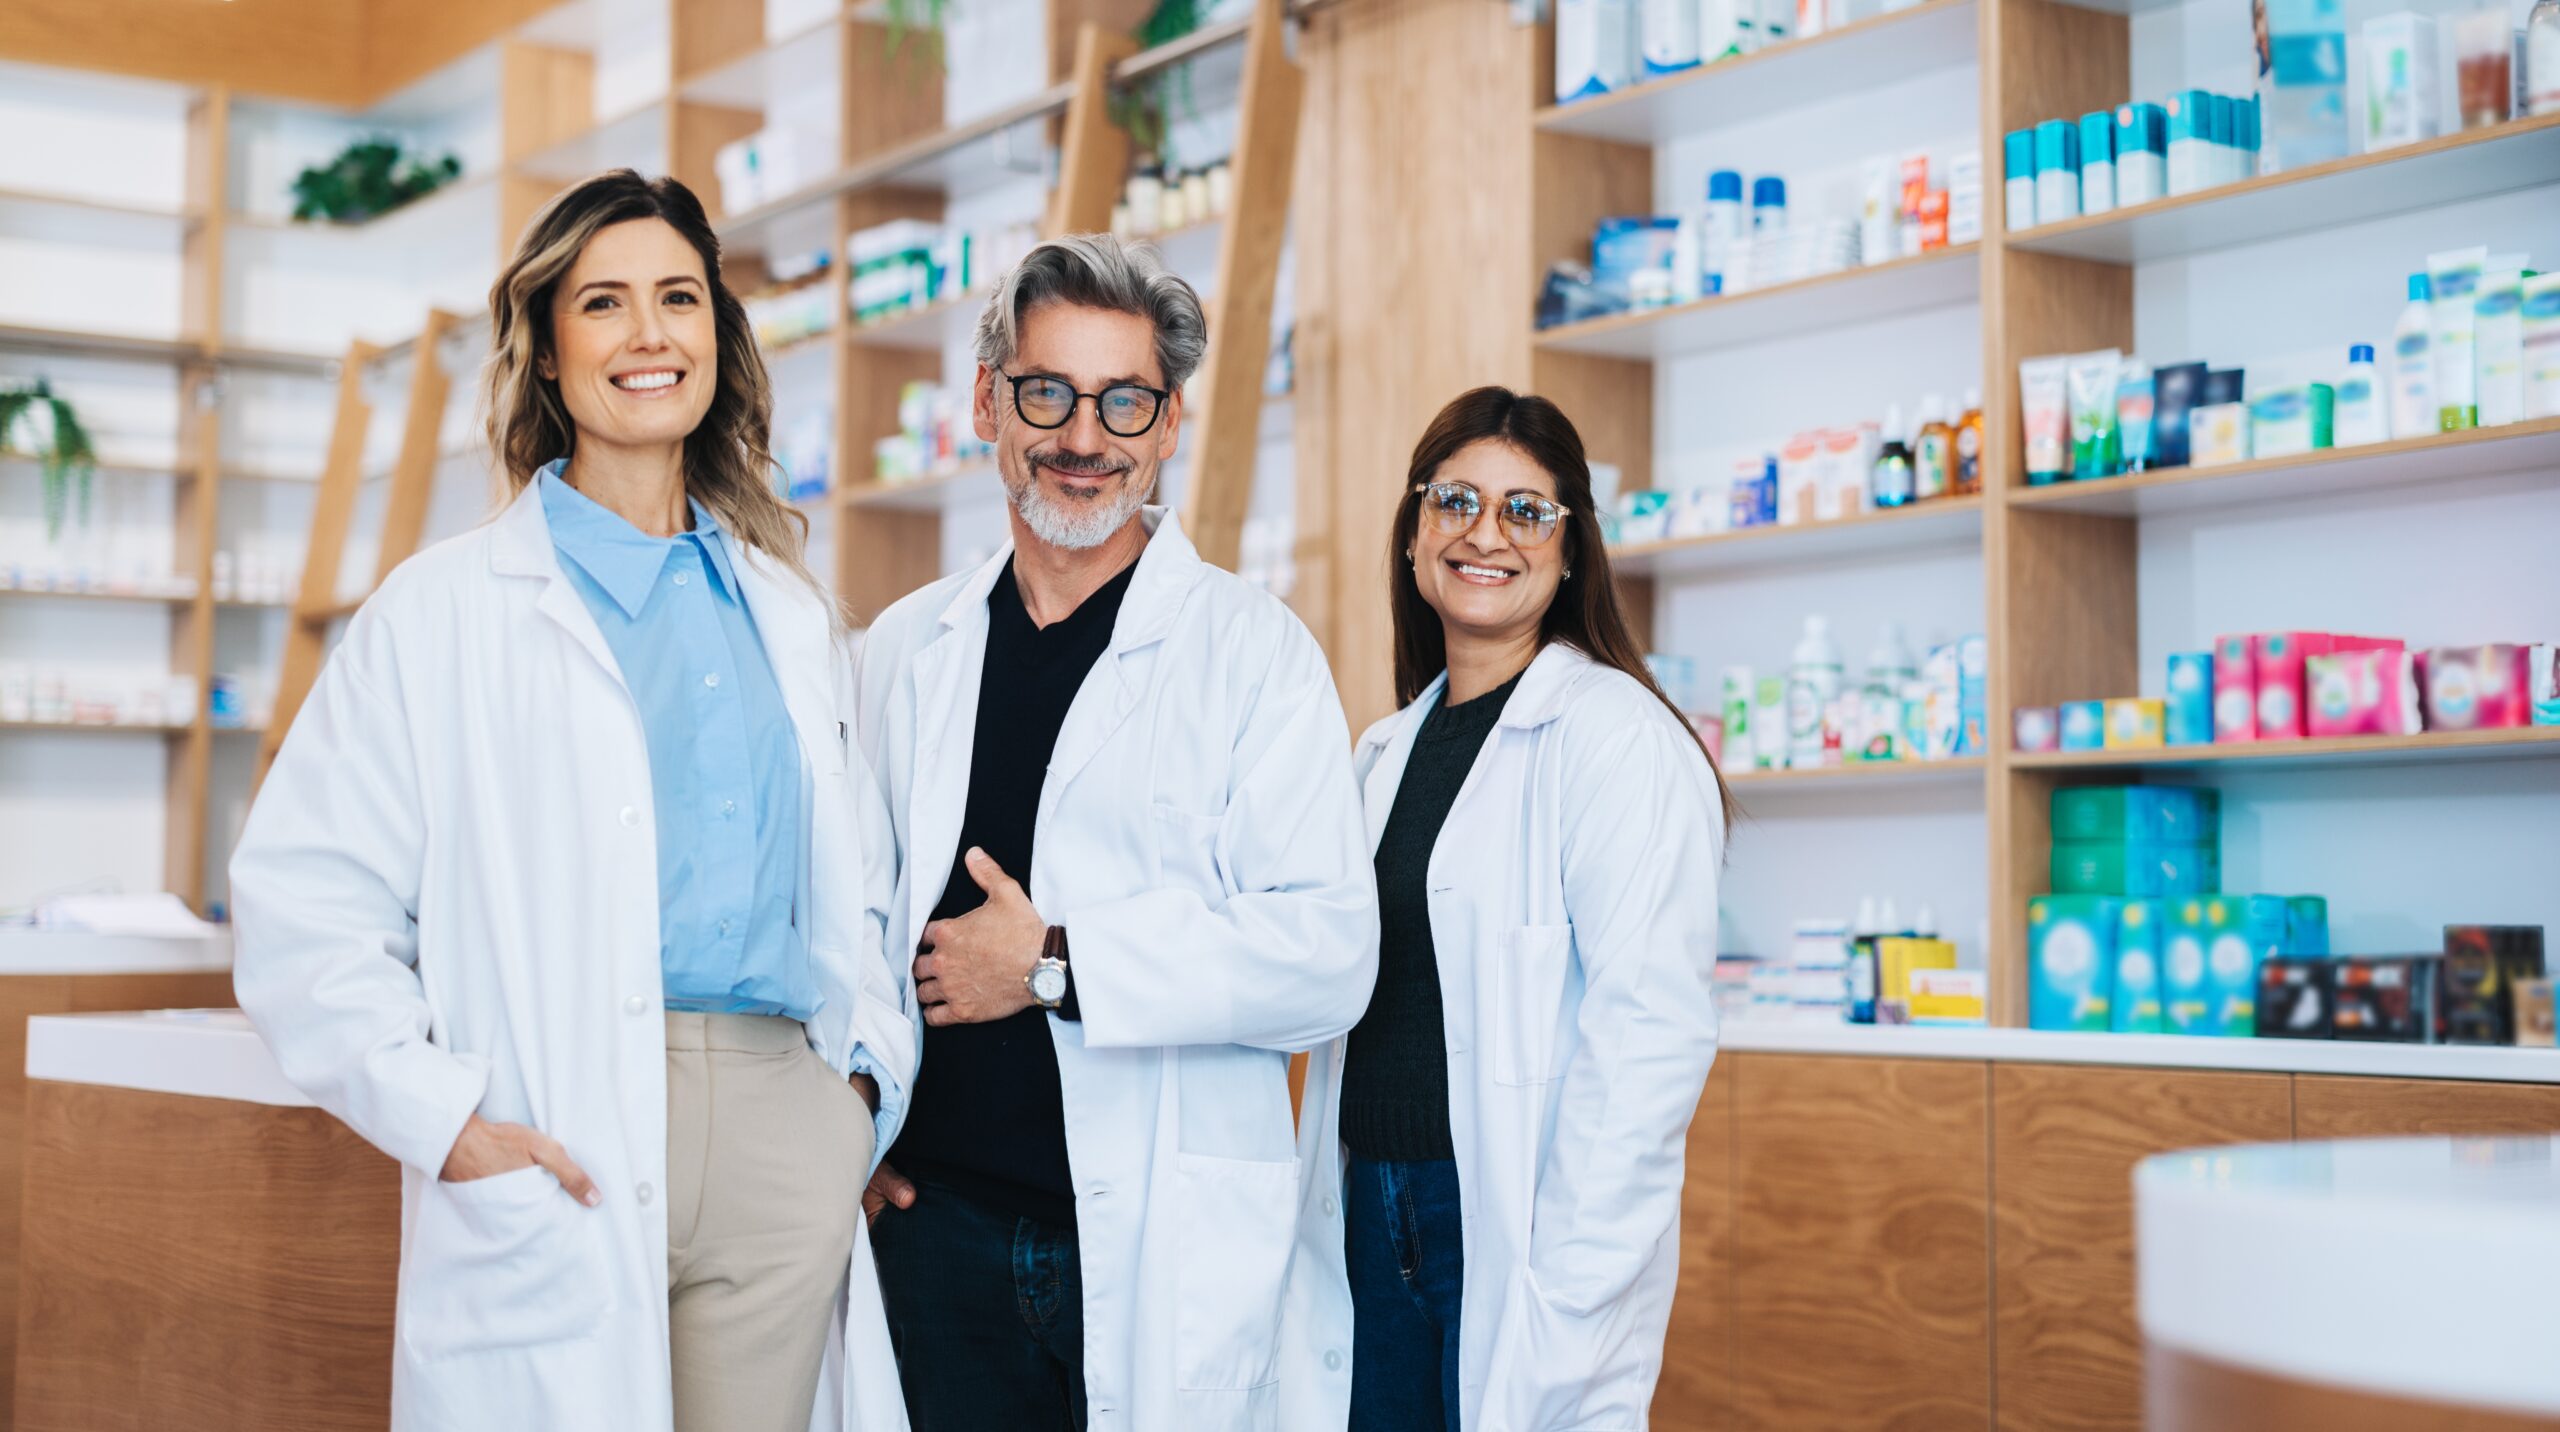 Three pharmacists standing together and looking at the camera.